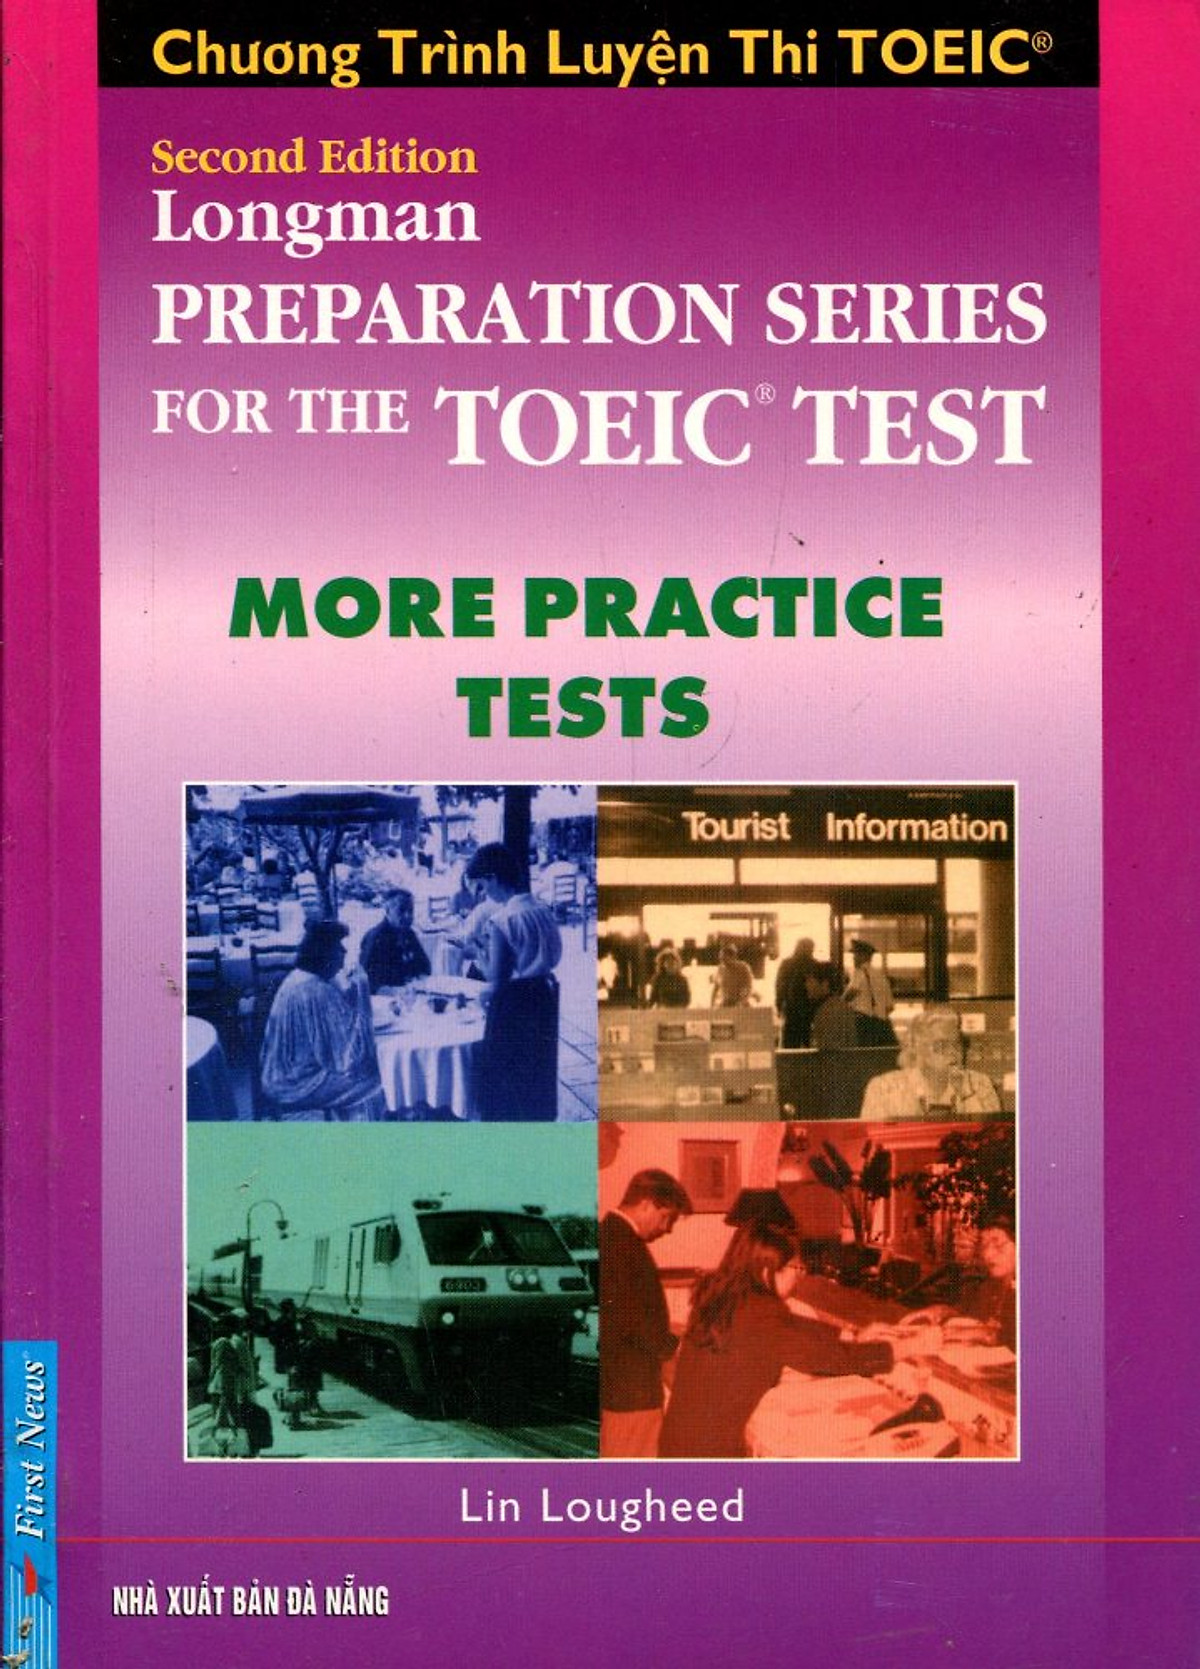 The Toeic Test 2 Longman More Practice Tests